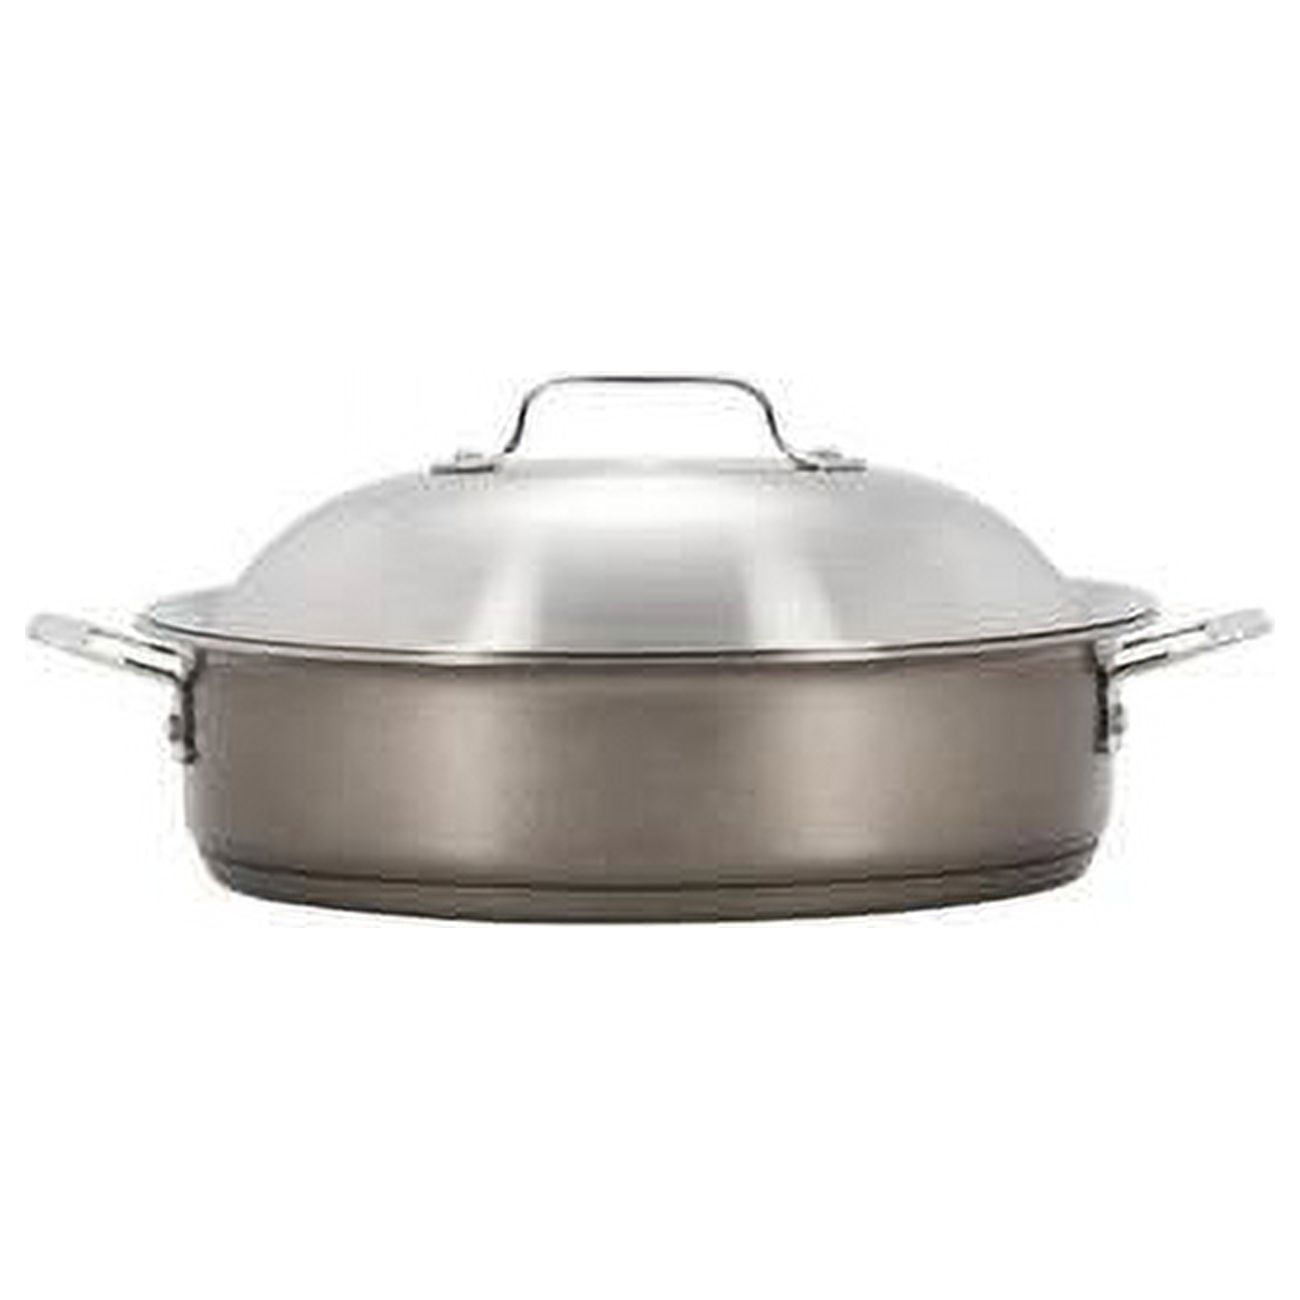 Picture of Bon Chef 60001TAUPE 4 qt Hotstone Taupe Cucina Saut Use with Lid - Induction Bottom